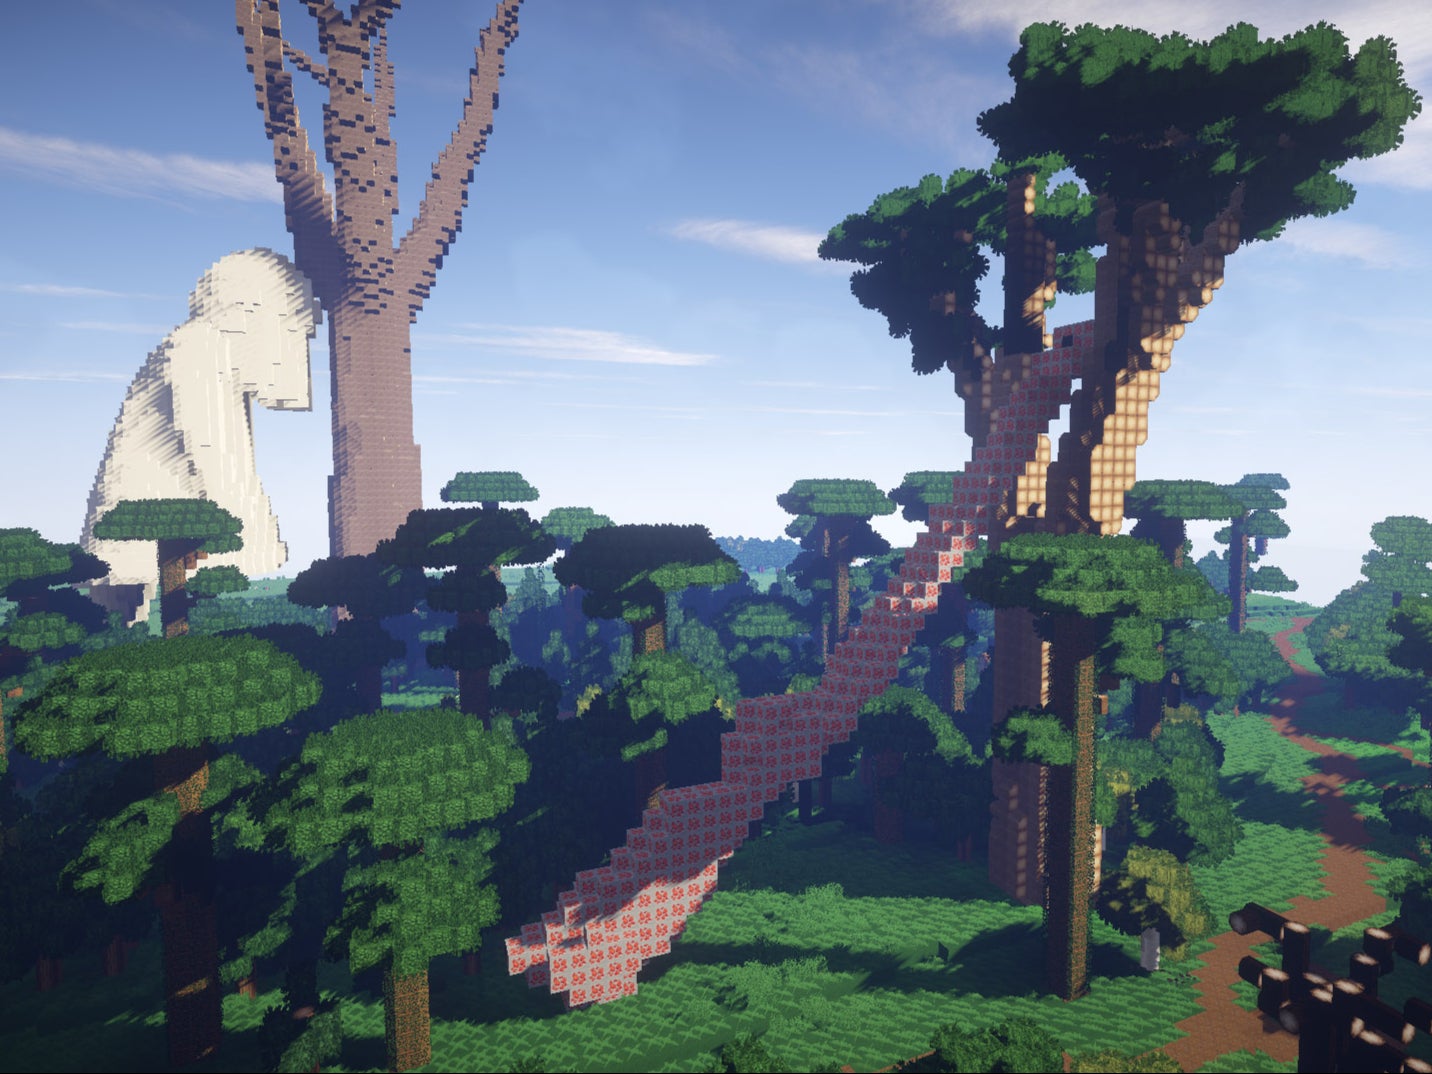 Minecraft is a popular game which encourages players to build using blocks, here allowing users to build trees and statues for the online park